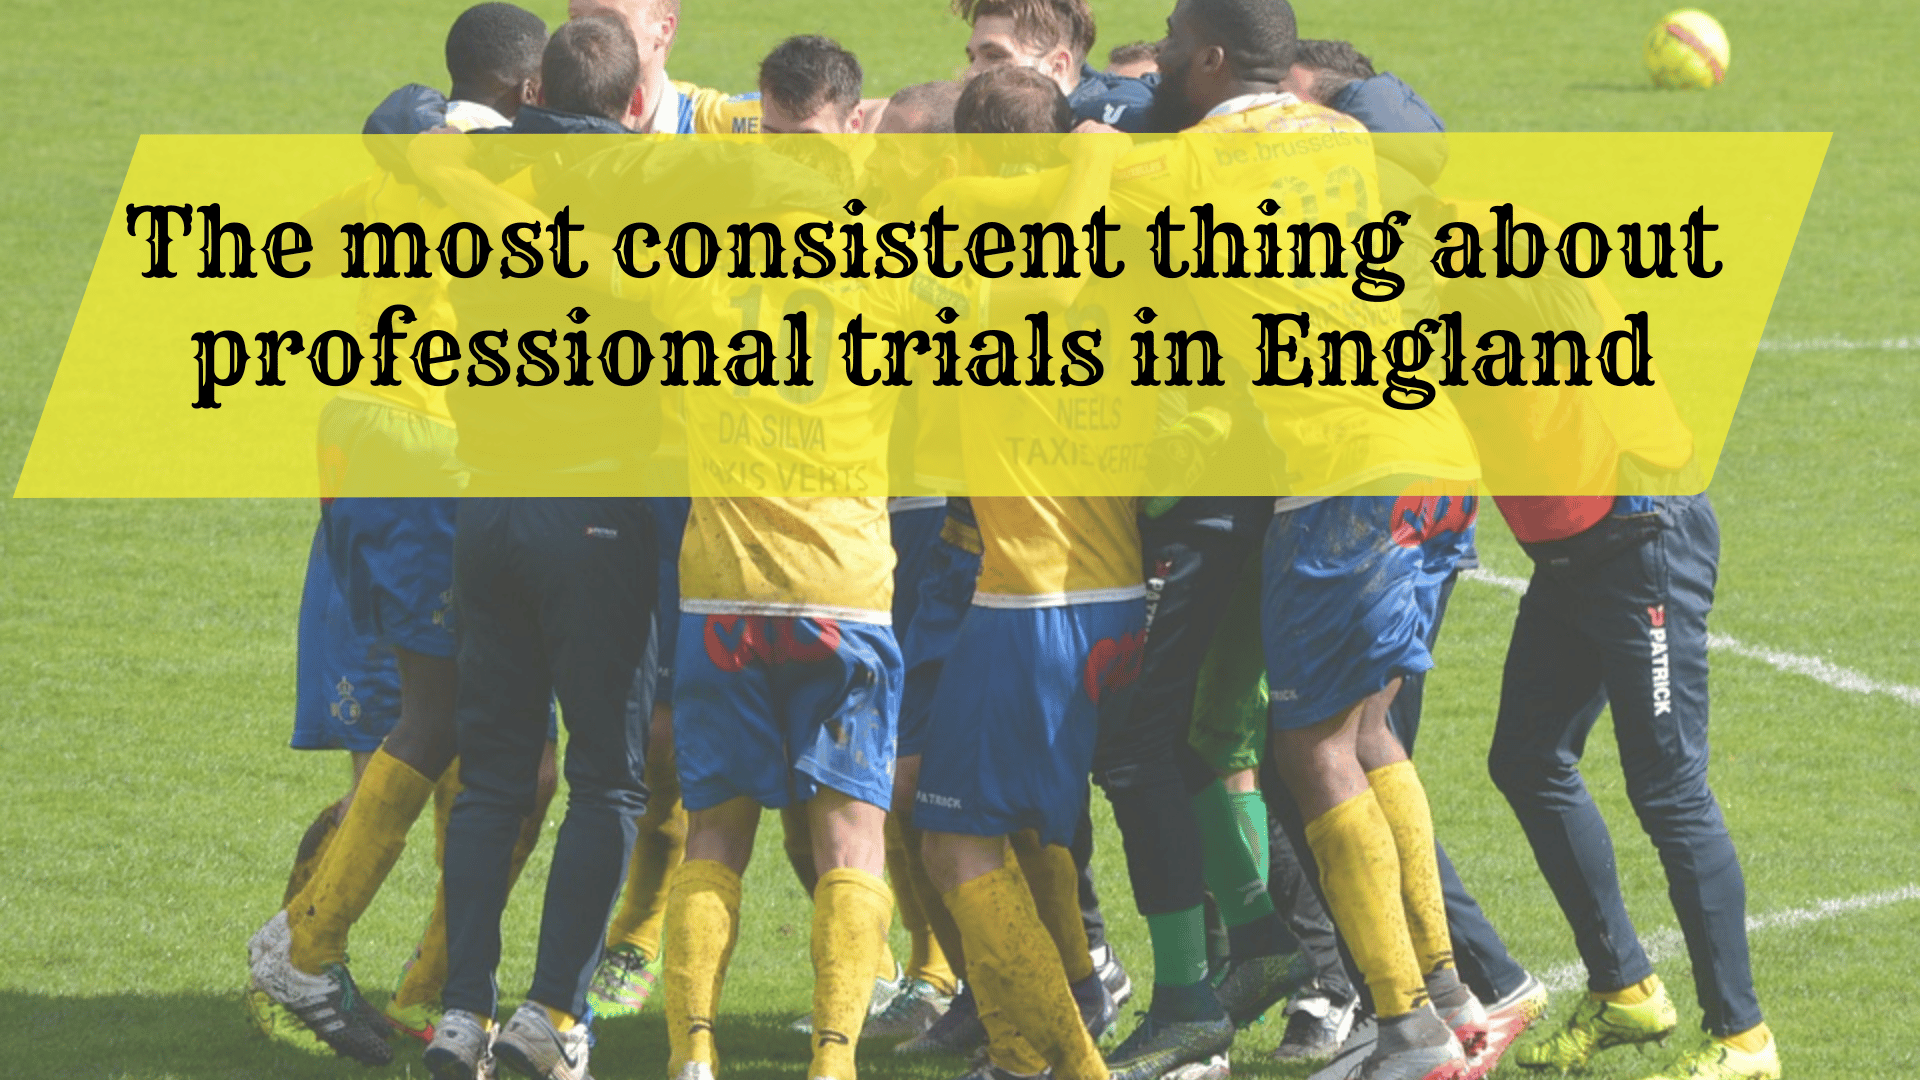 The most consistent thing about professional trials in England ...